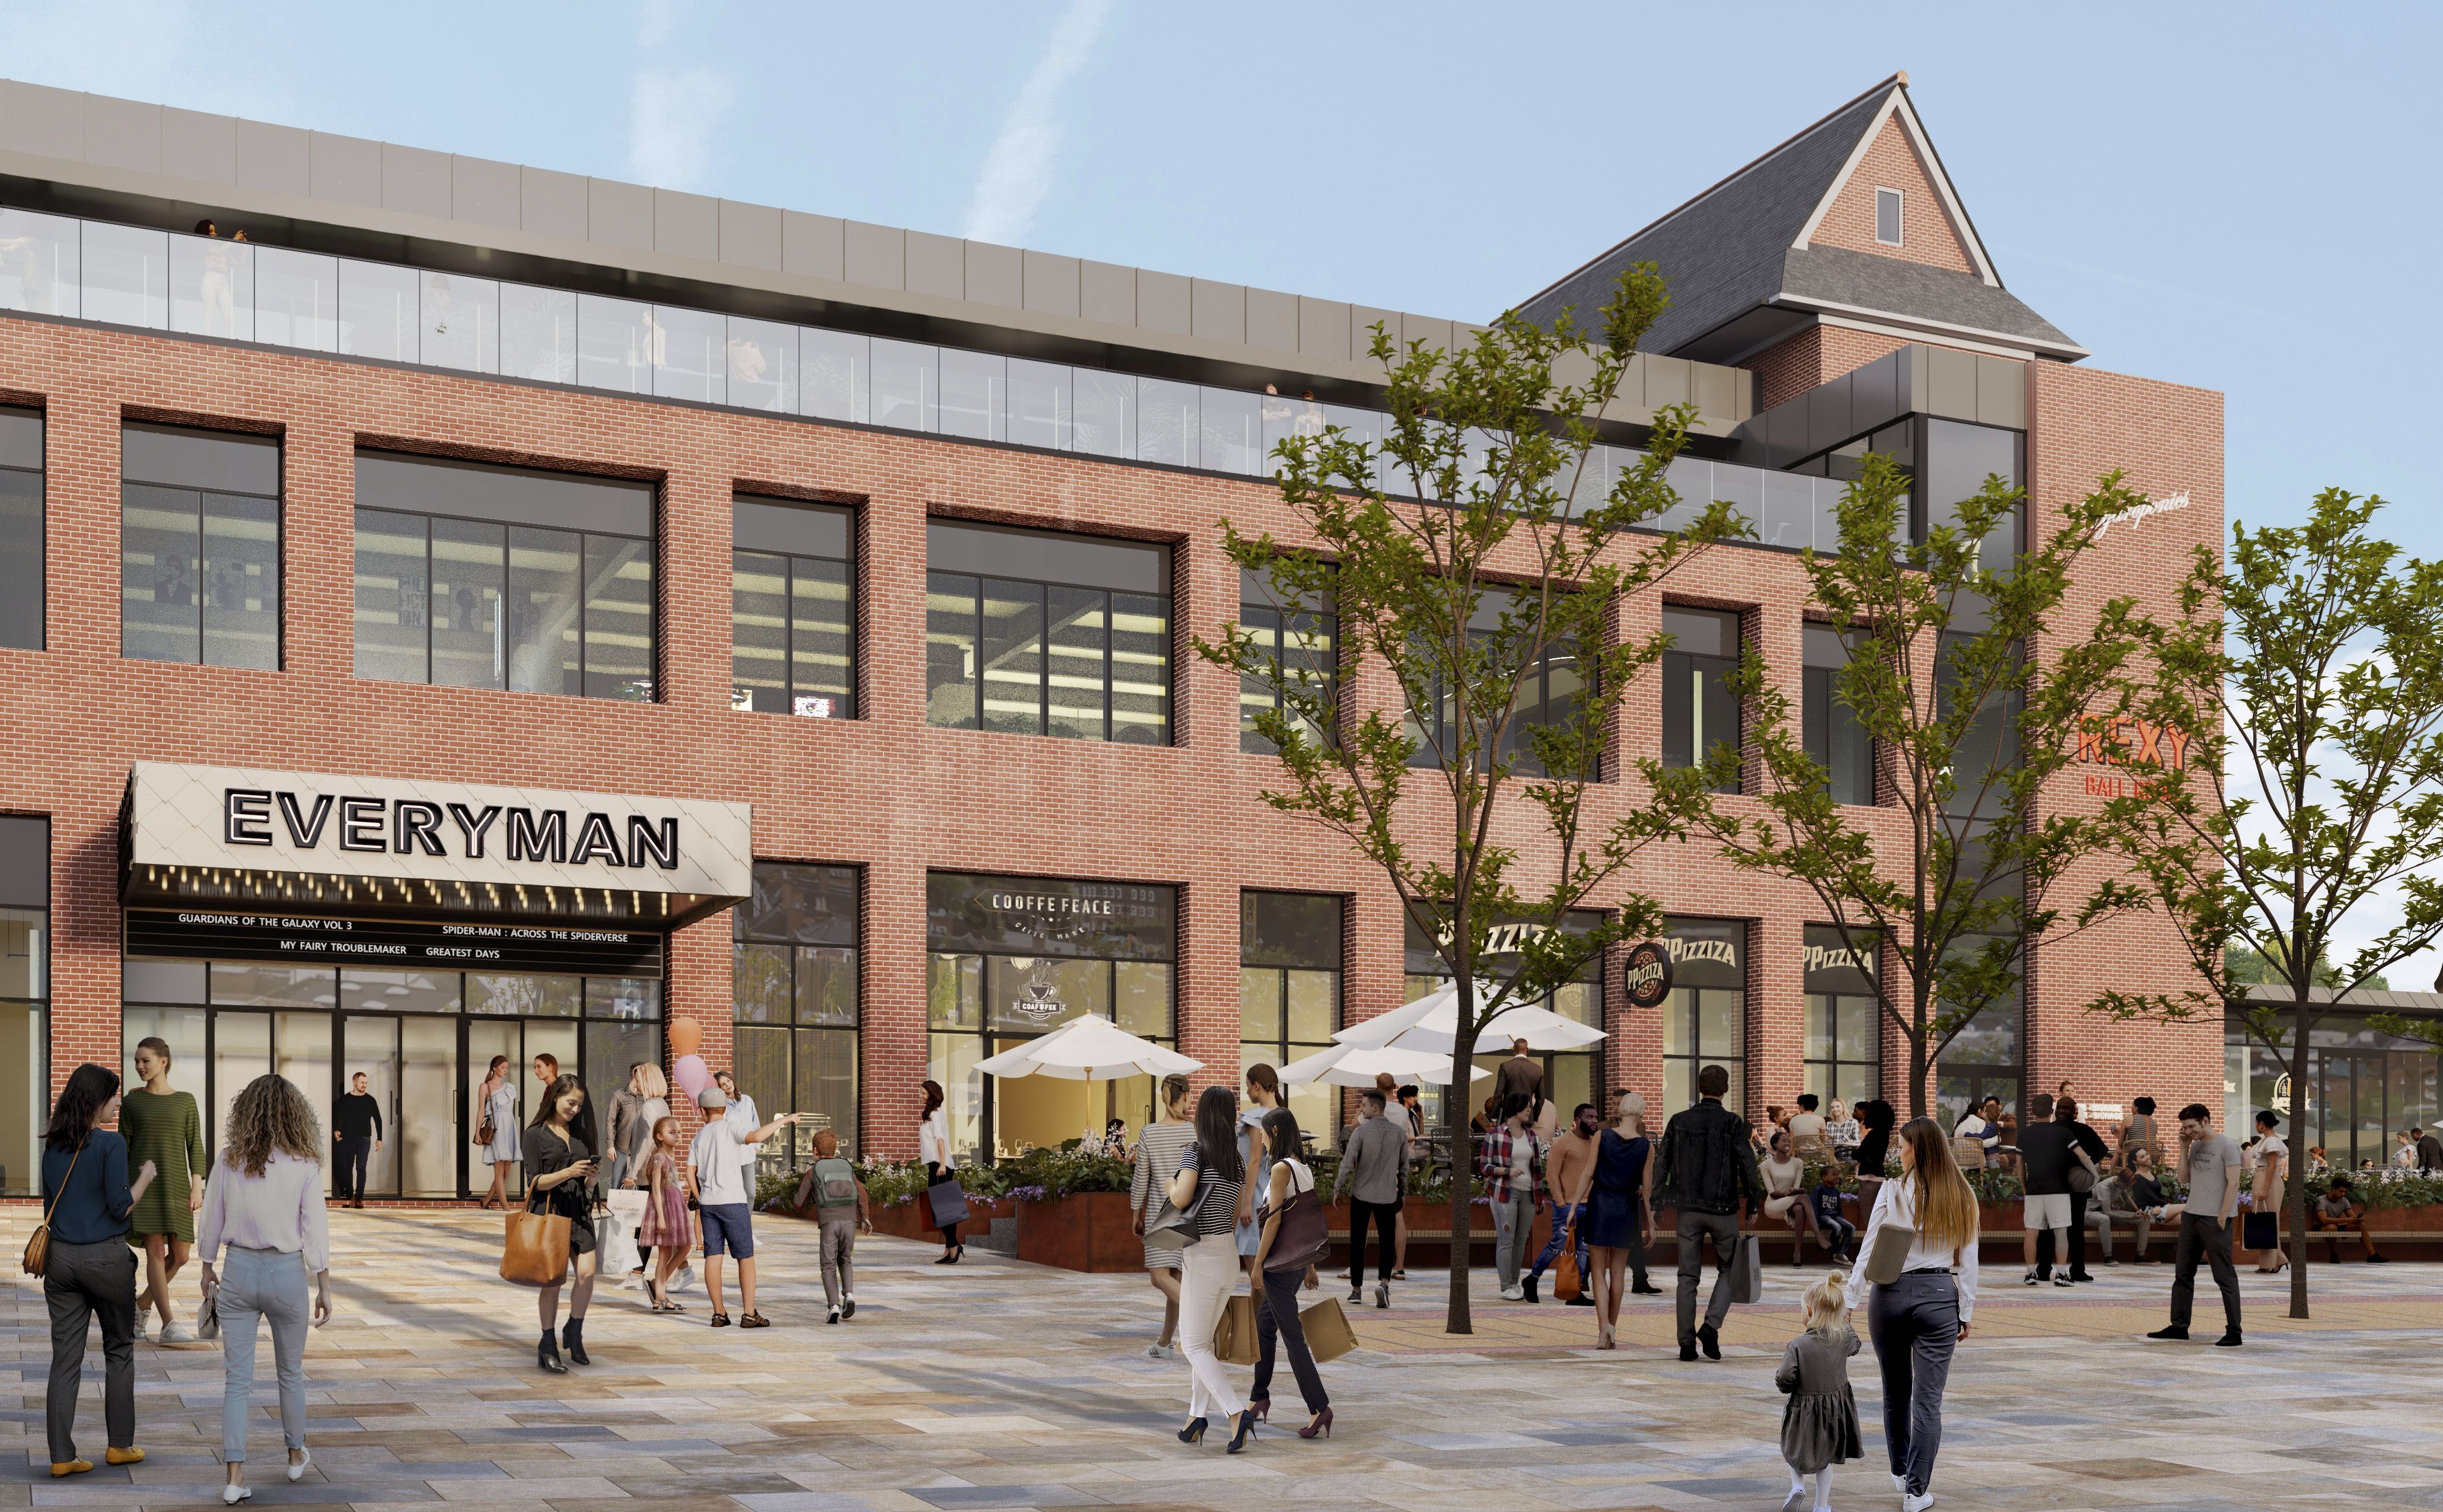 An artist’s impression of the planned plaza development in Lichfield's Three Spires shopping centre featuring the redeveloped former Debenhams store.